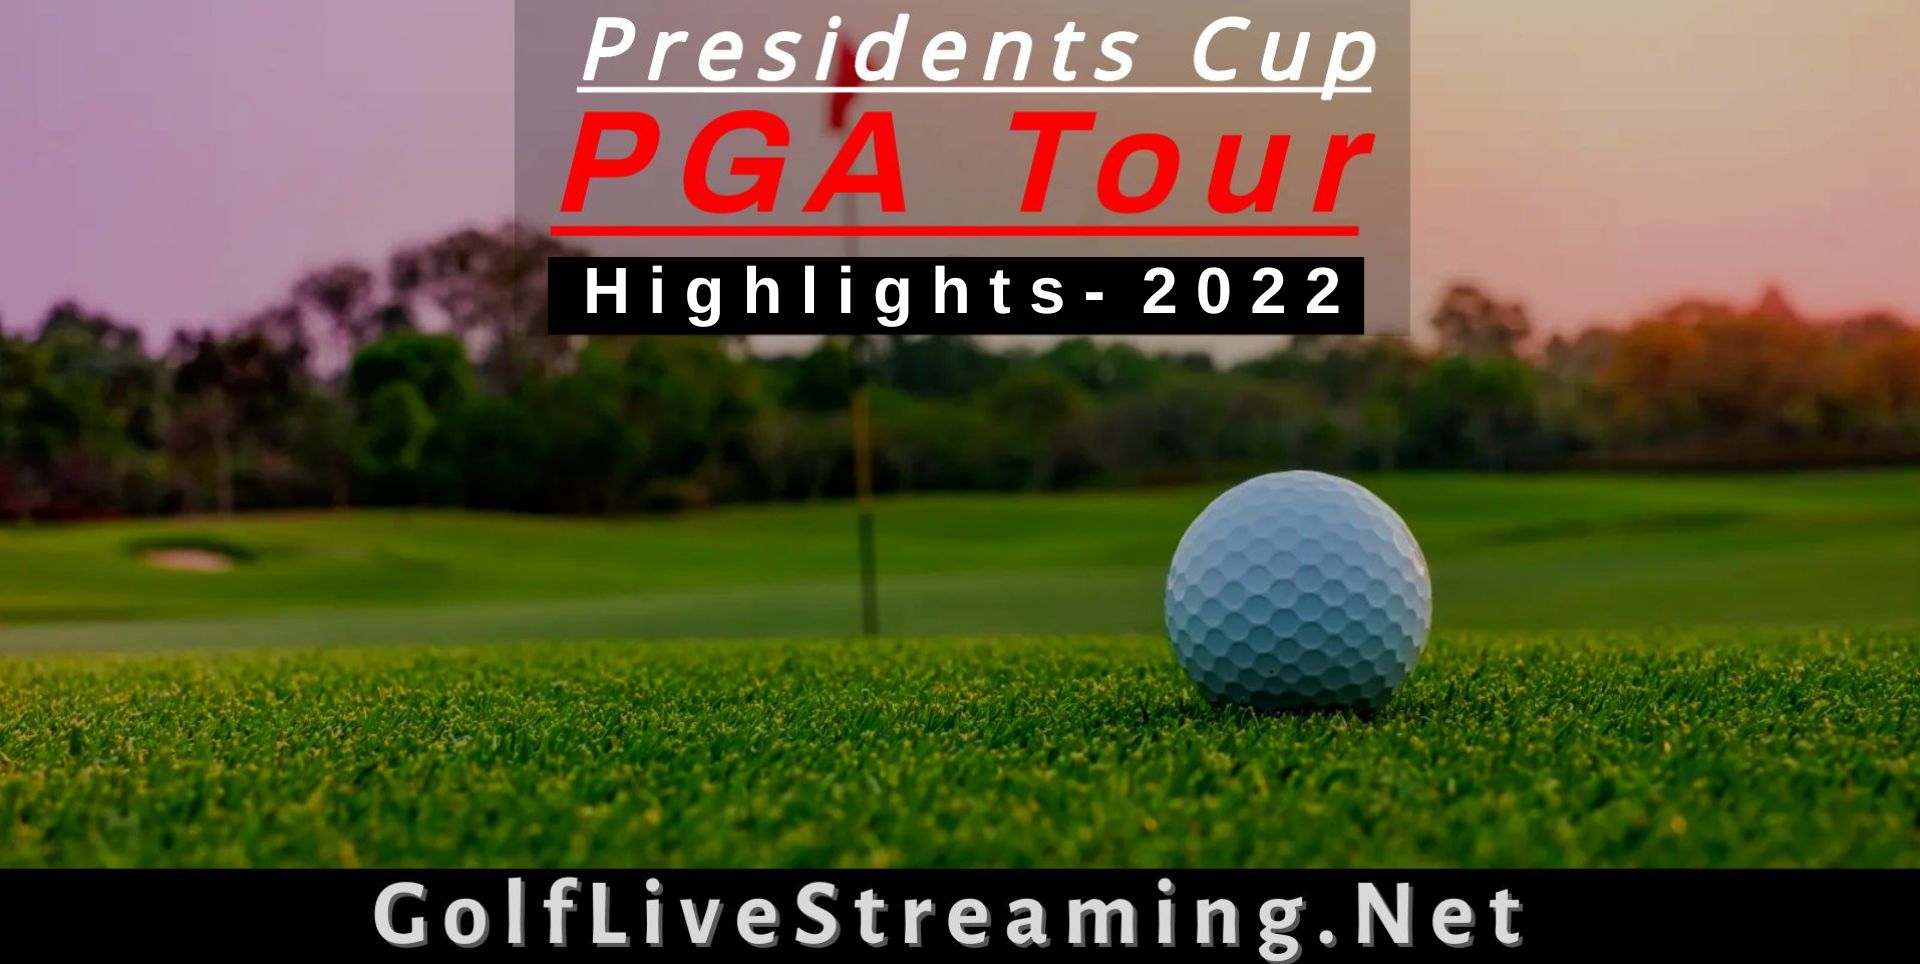 Presidents Cup Round 2 Highlights 2022 PGA Tour